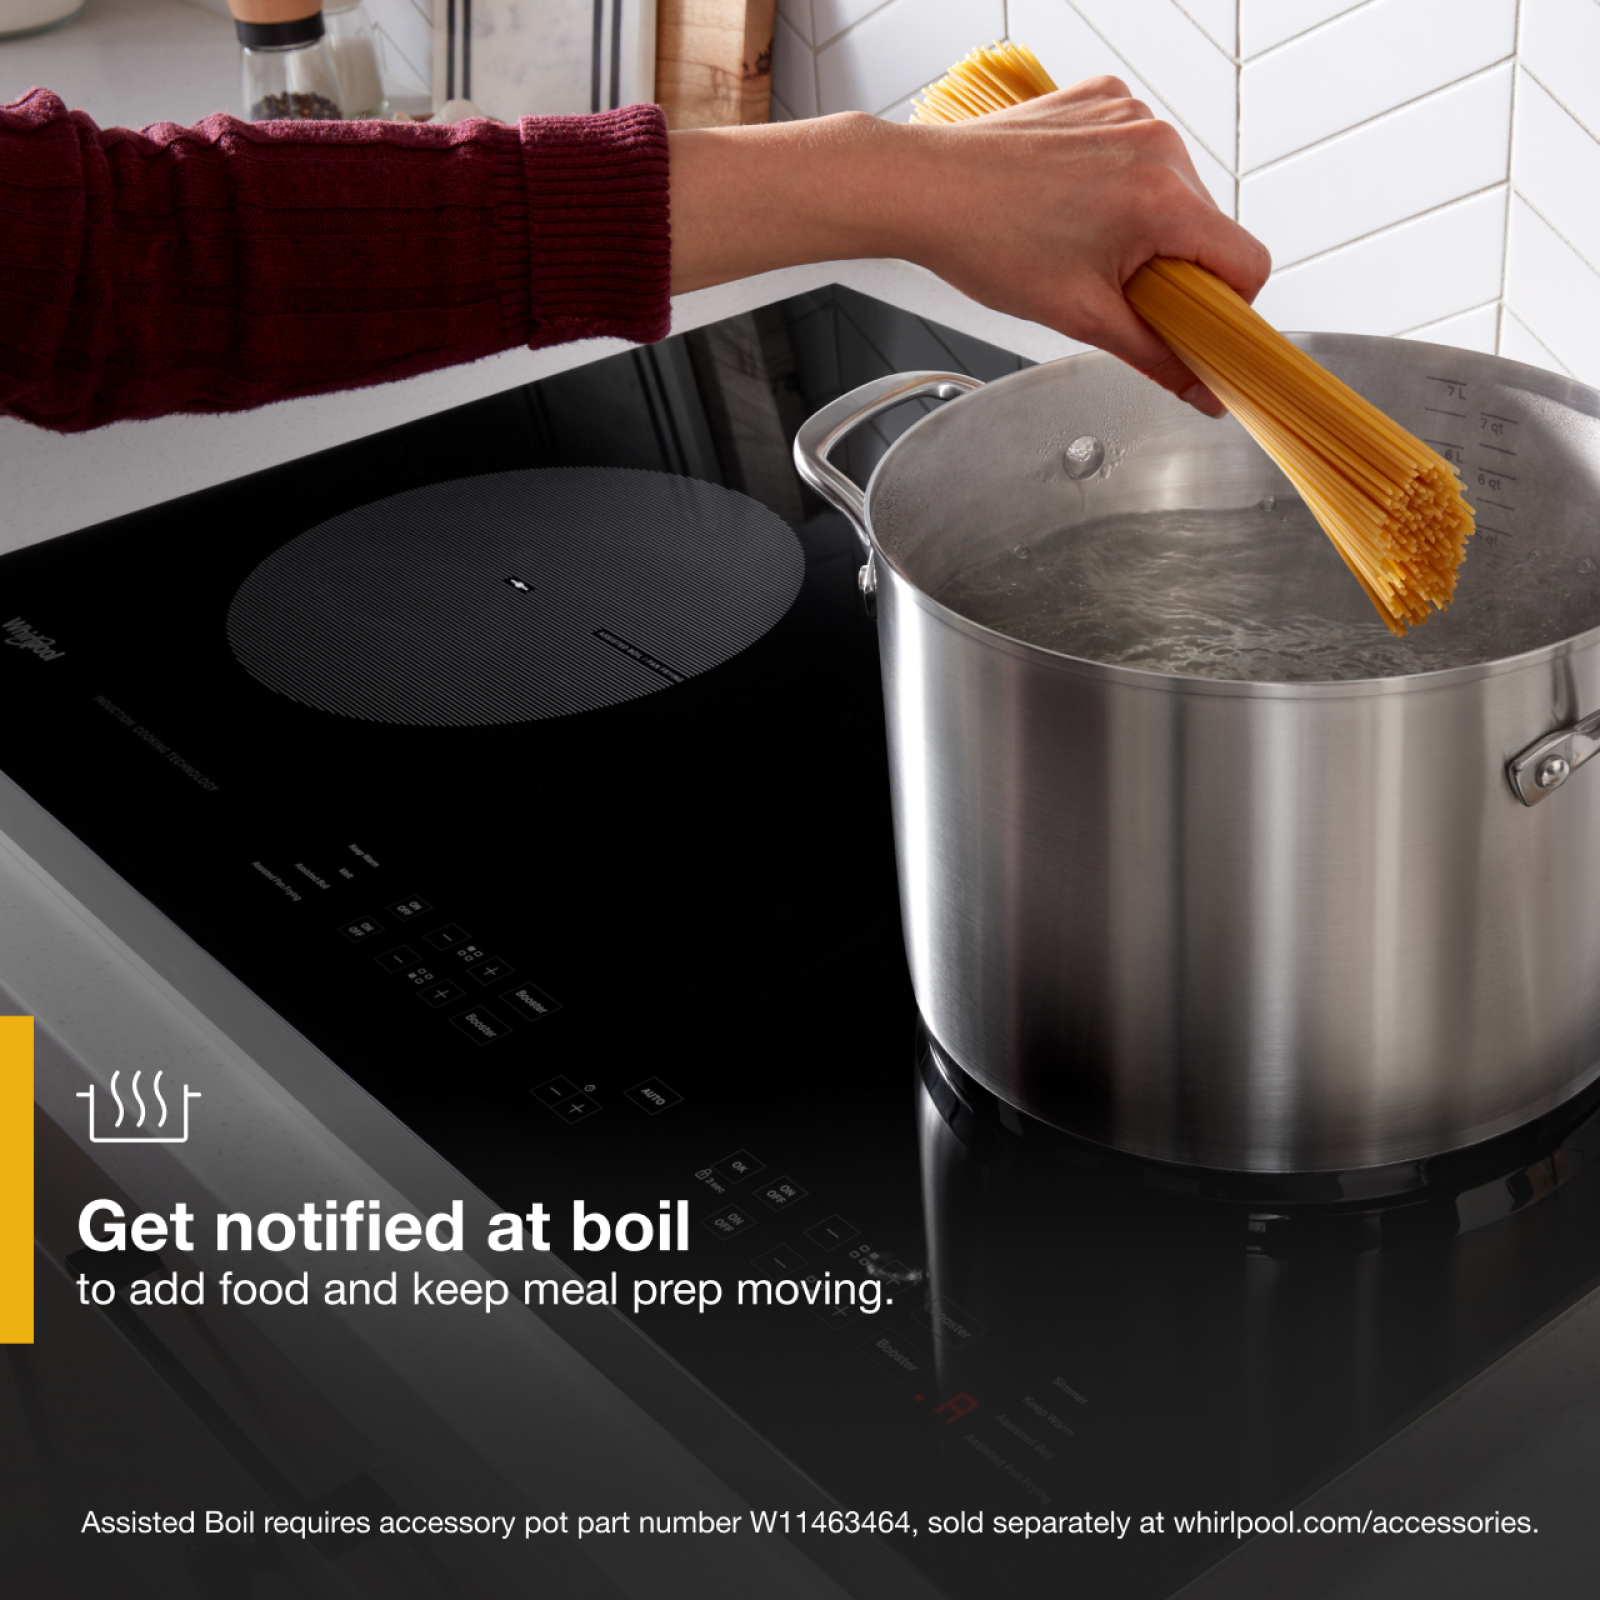 Whirlpool - 30.75 inch wide Induction Cooktop in Black - WCI55US0JS